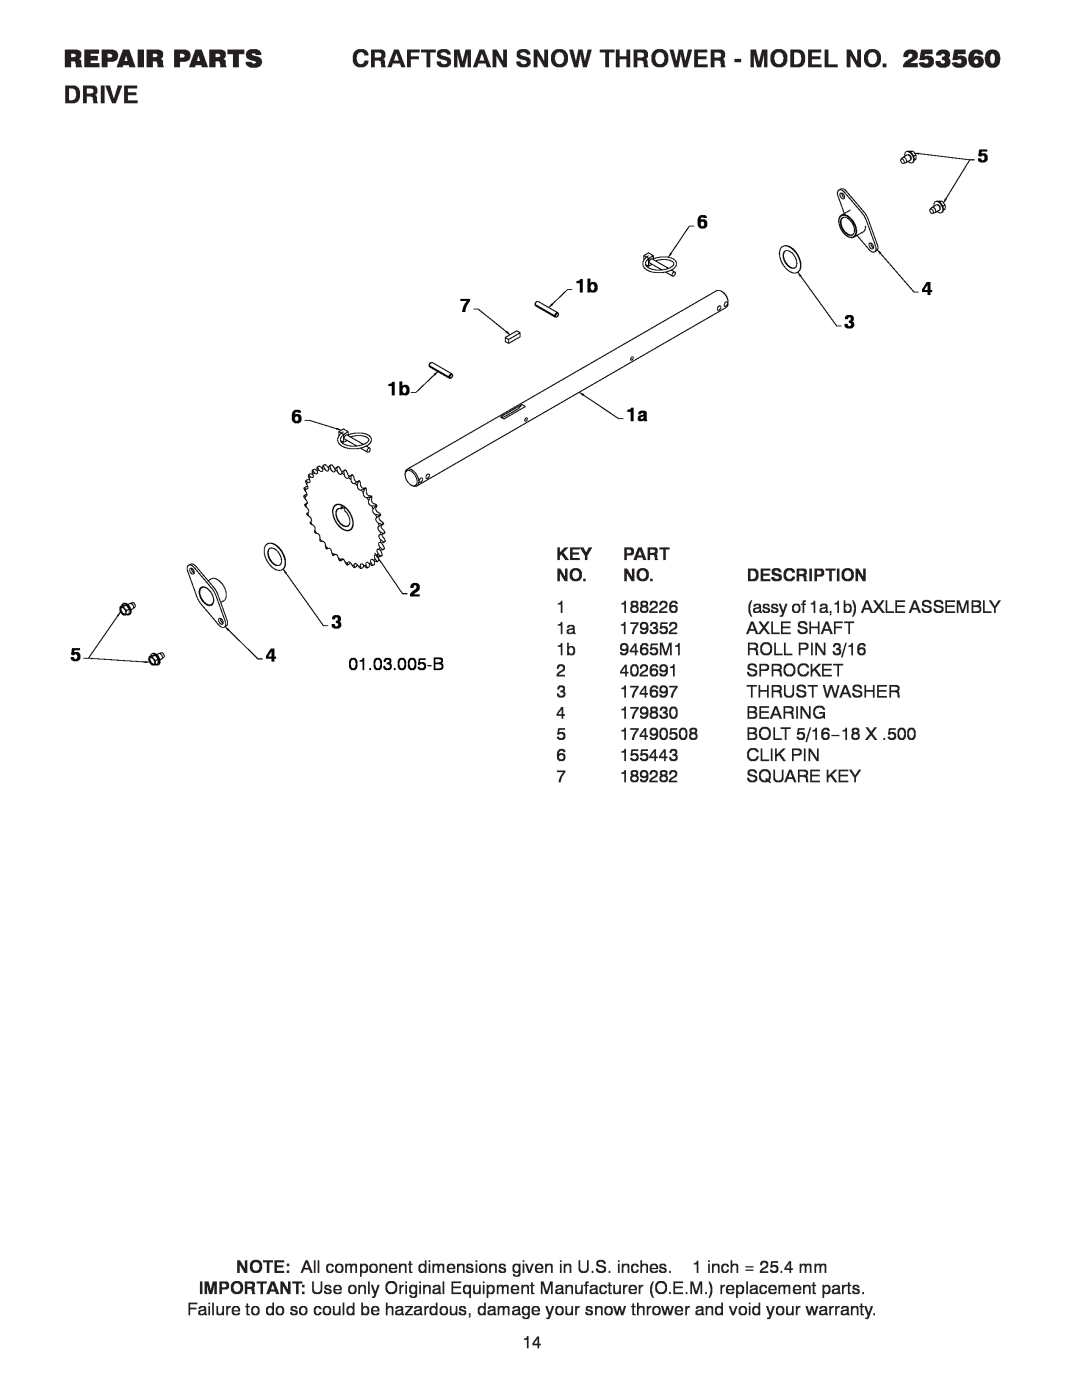 Craftsman REPAIR PARTS CRAFTSMAN SNOW THROWER - MODEL NO. 253560 DRIVE, Part, Description, assy of 1a,1b AXLE ASSEMBLY 